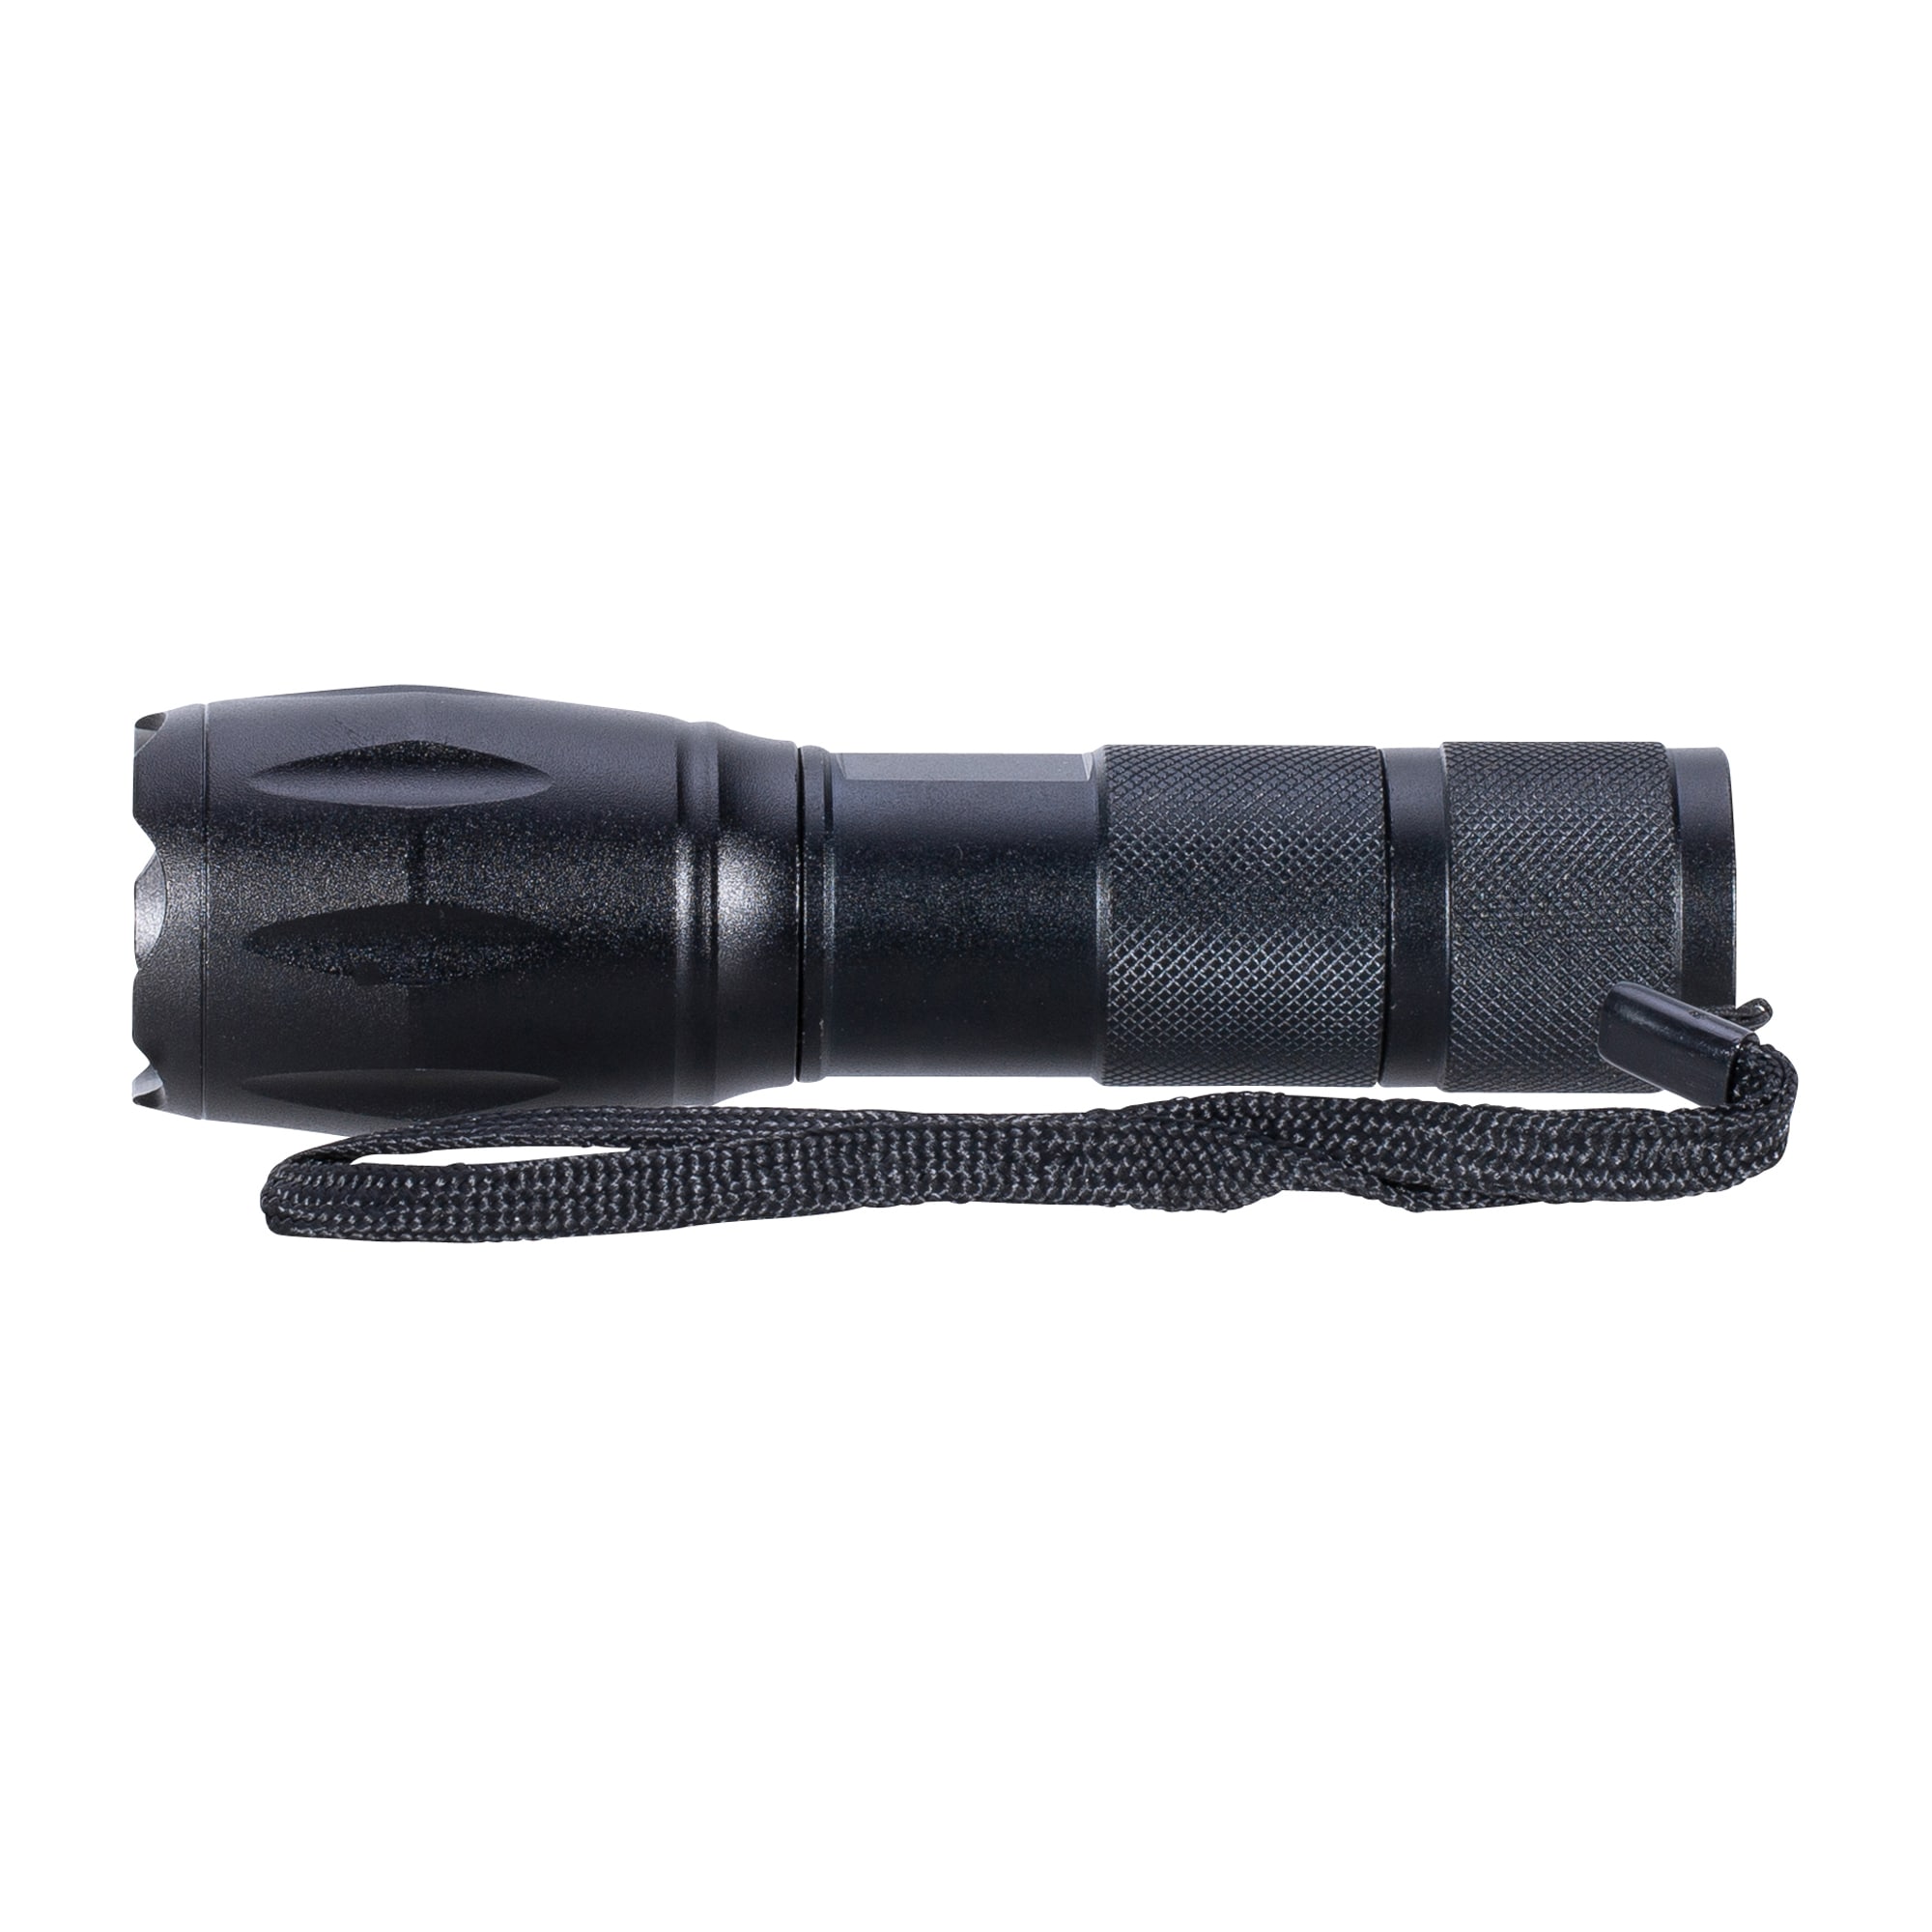 Purchase the MFH Deluxa LED Military Torch black